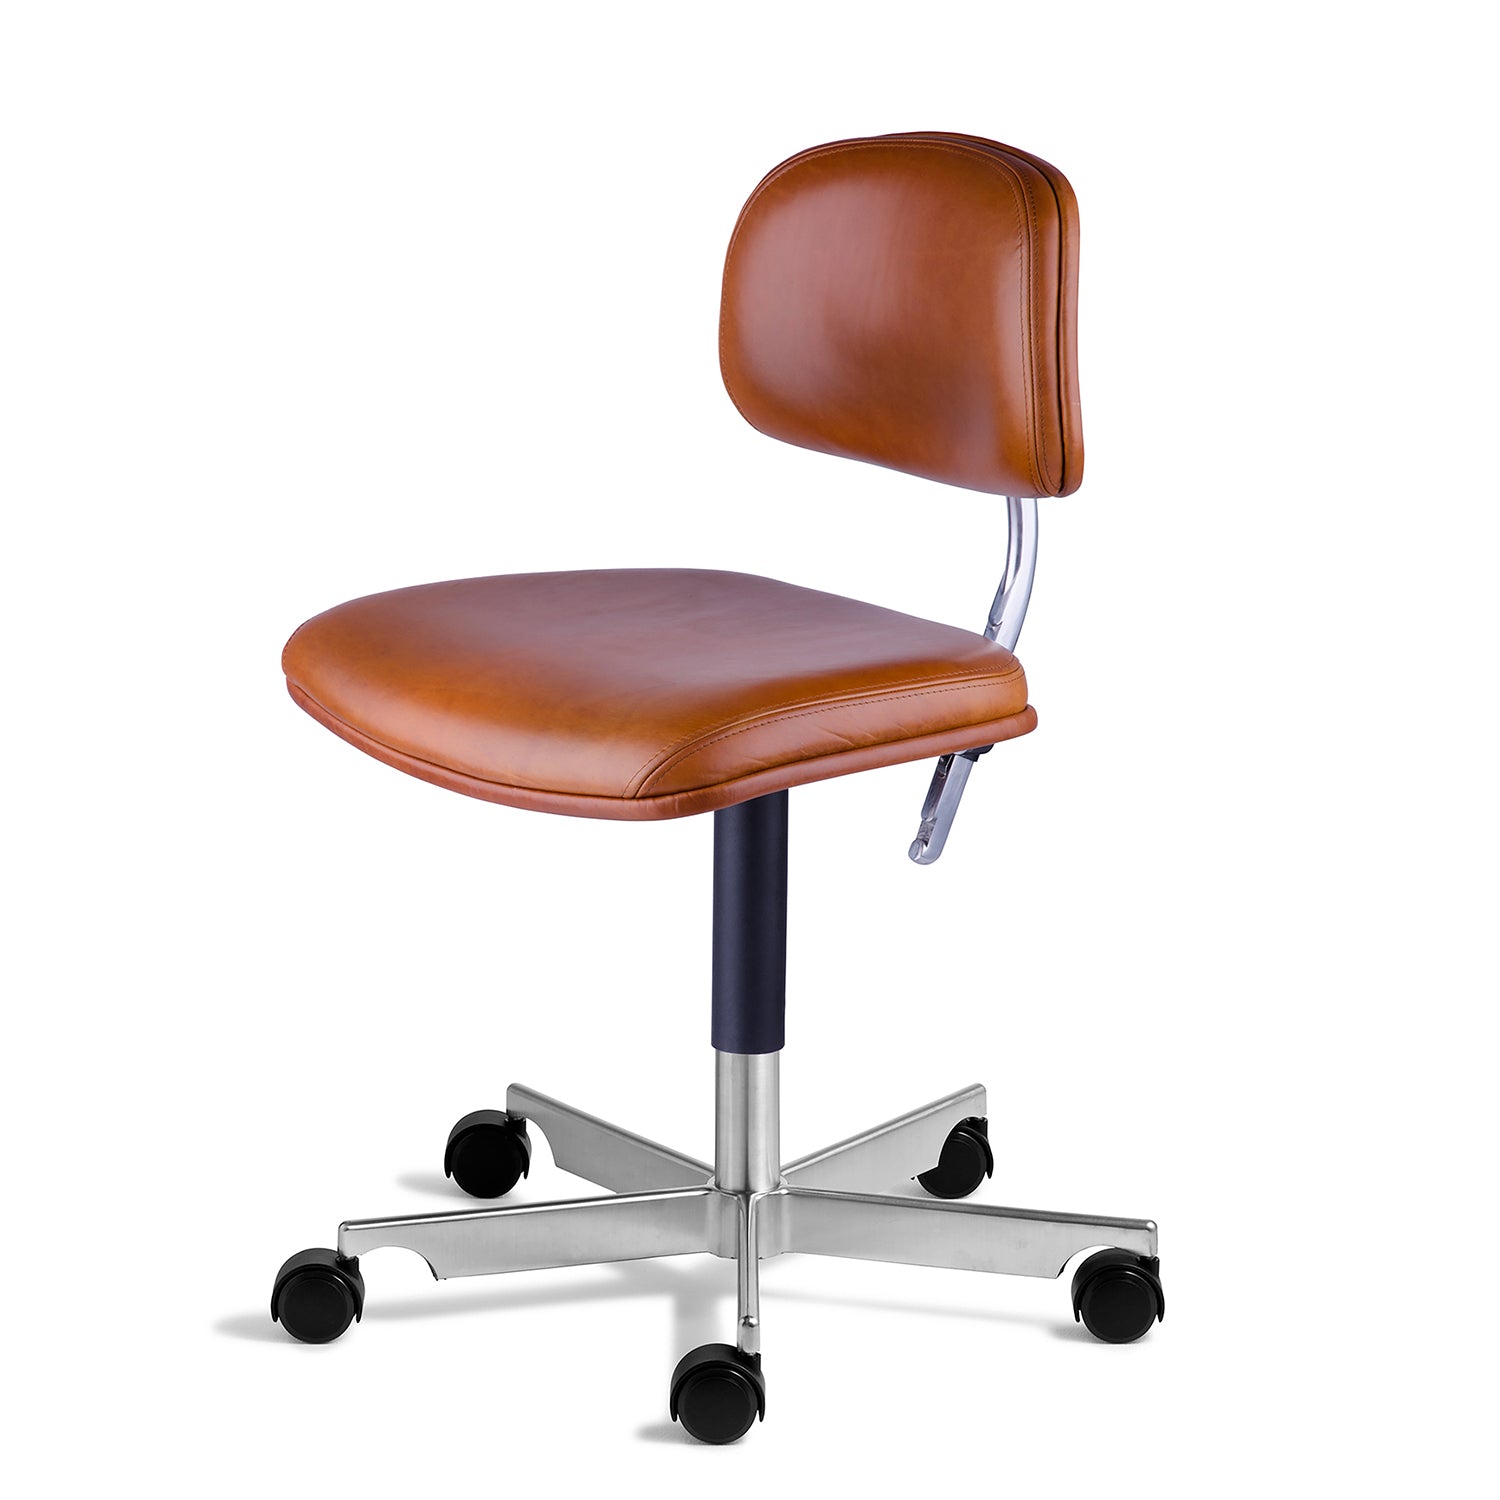 Kevi Chair 2534u: Fully Upholstered